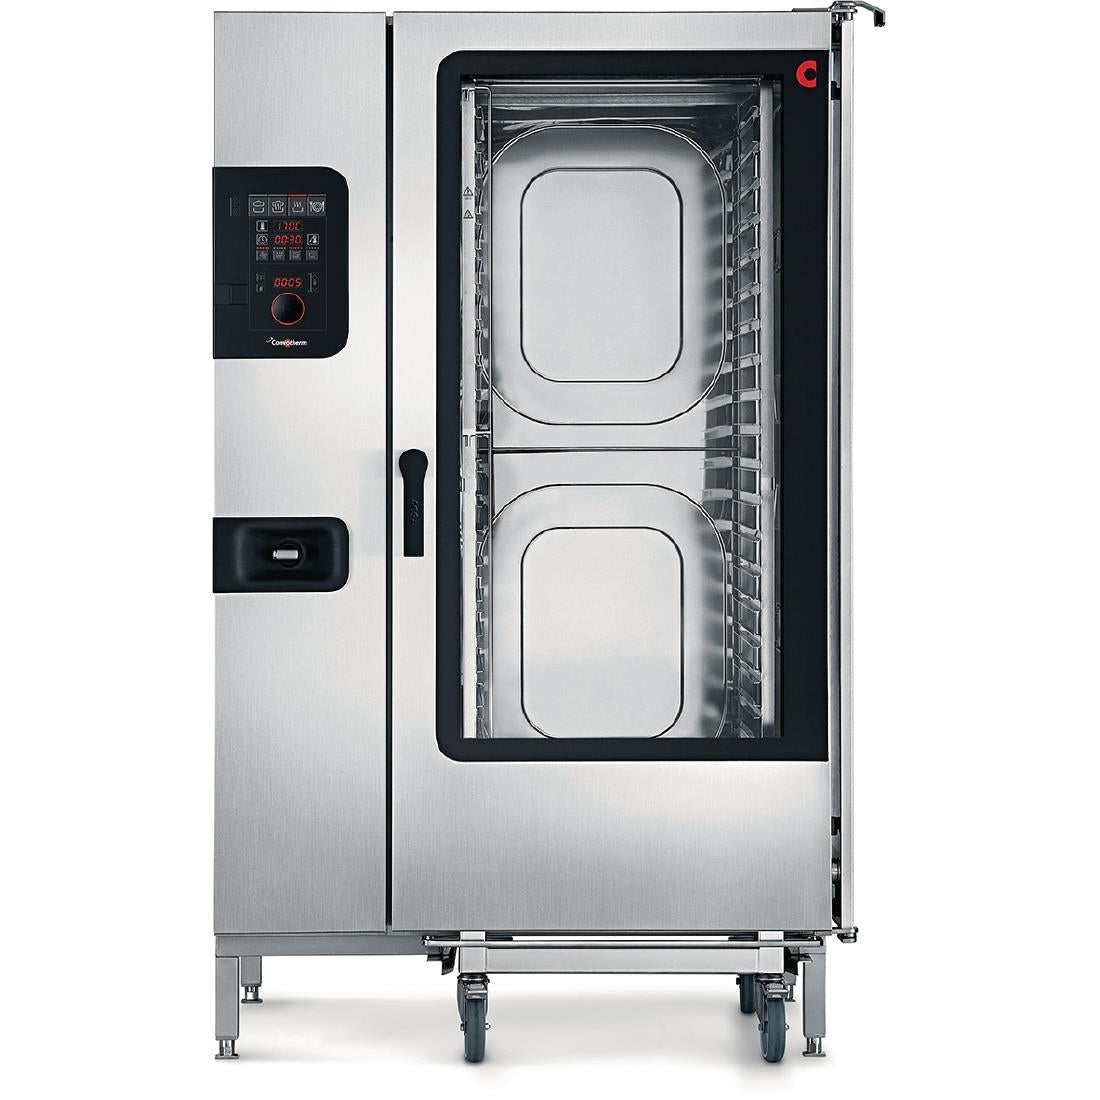 HC264-MO Convotherm 4 easyDial Combi Oven 20 x 2 x1 GN Grid with ConvoGrill JD Catering Equipment Solutions Ltd